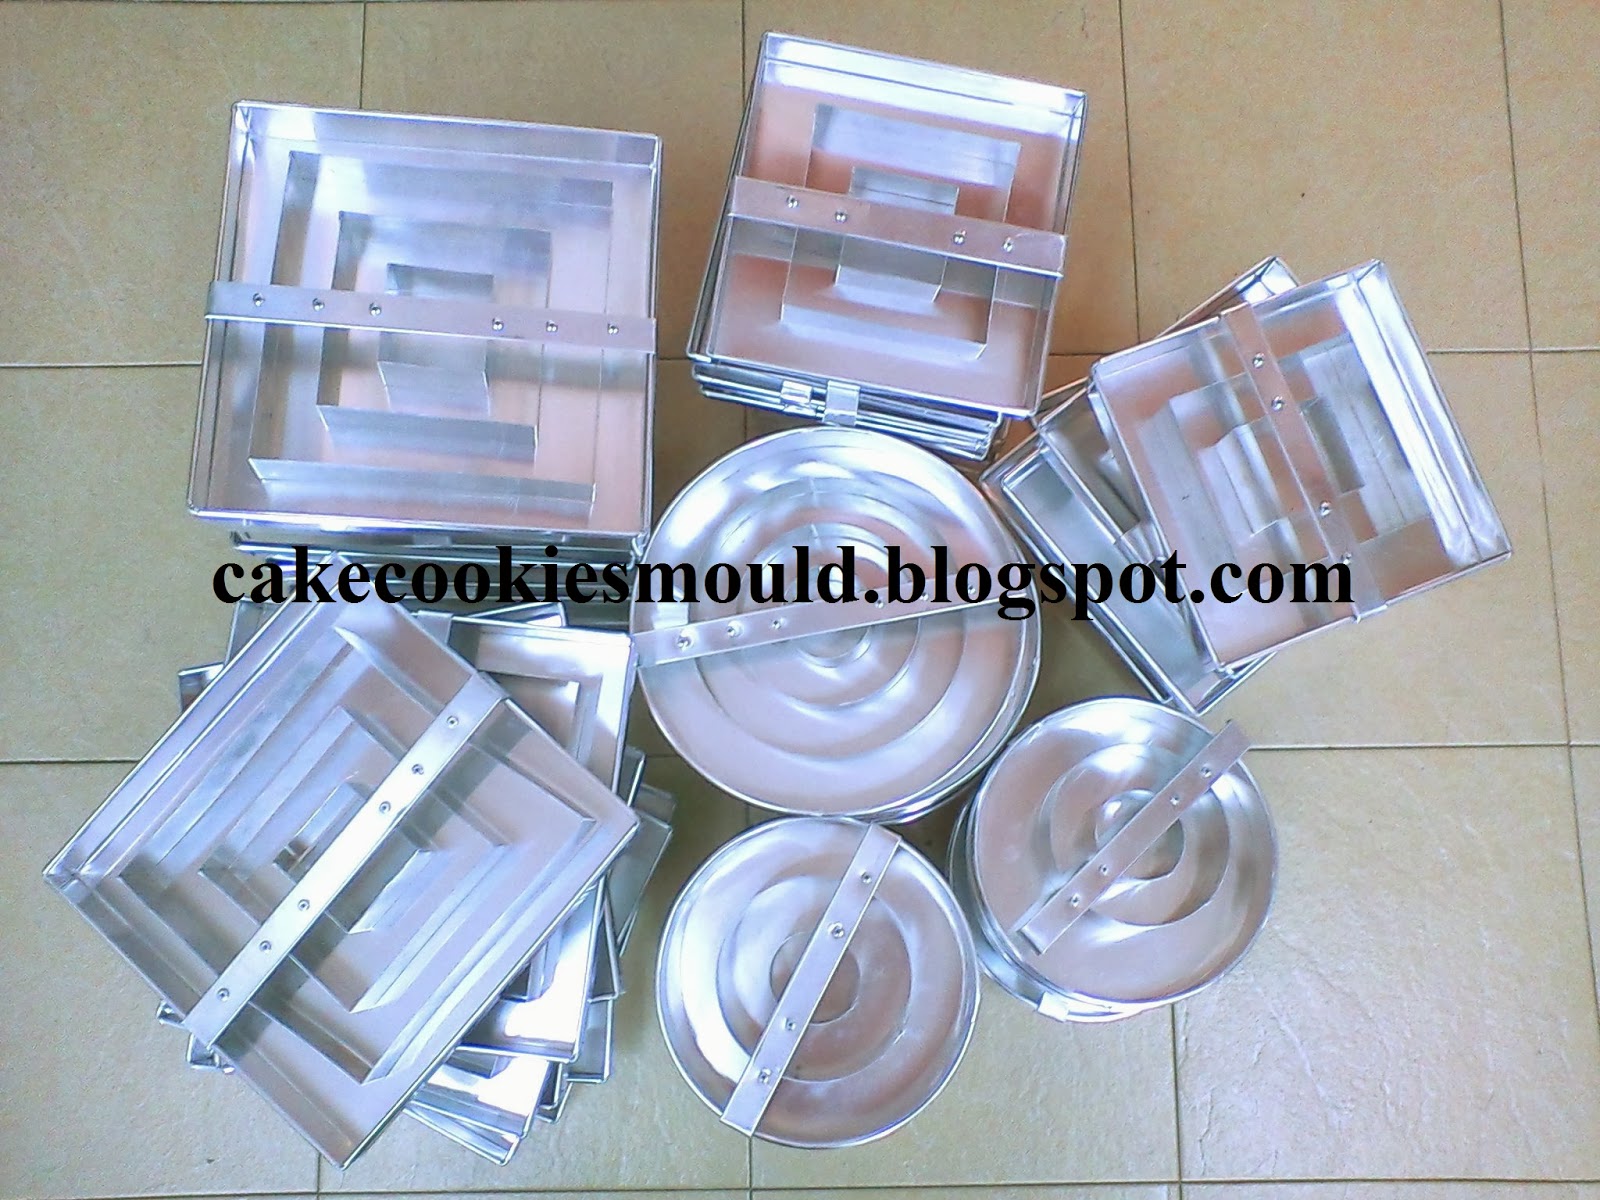 Cake & Cookies Mould